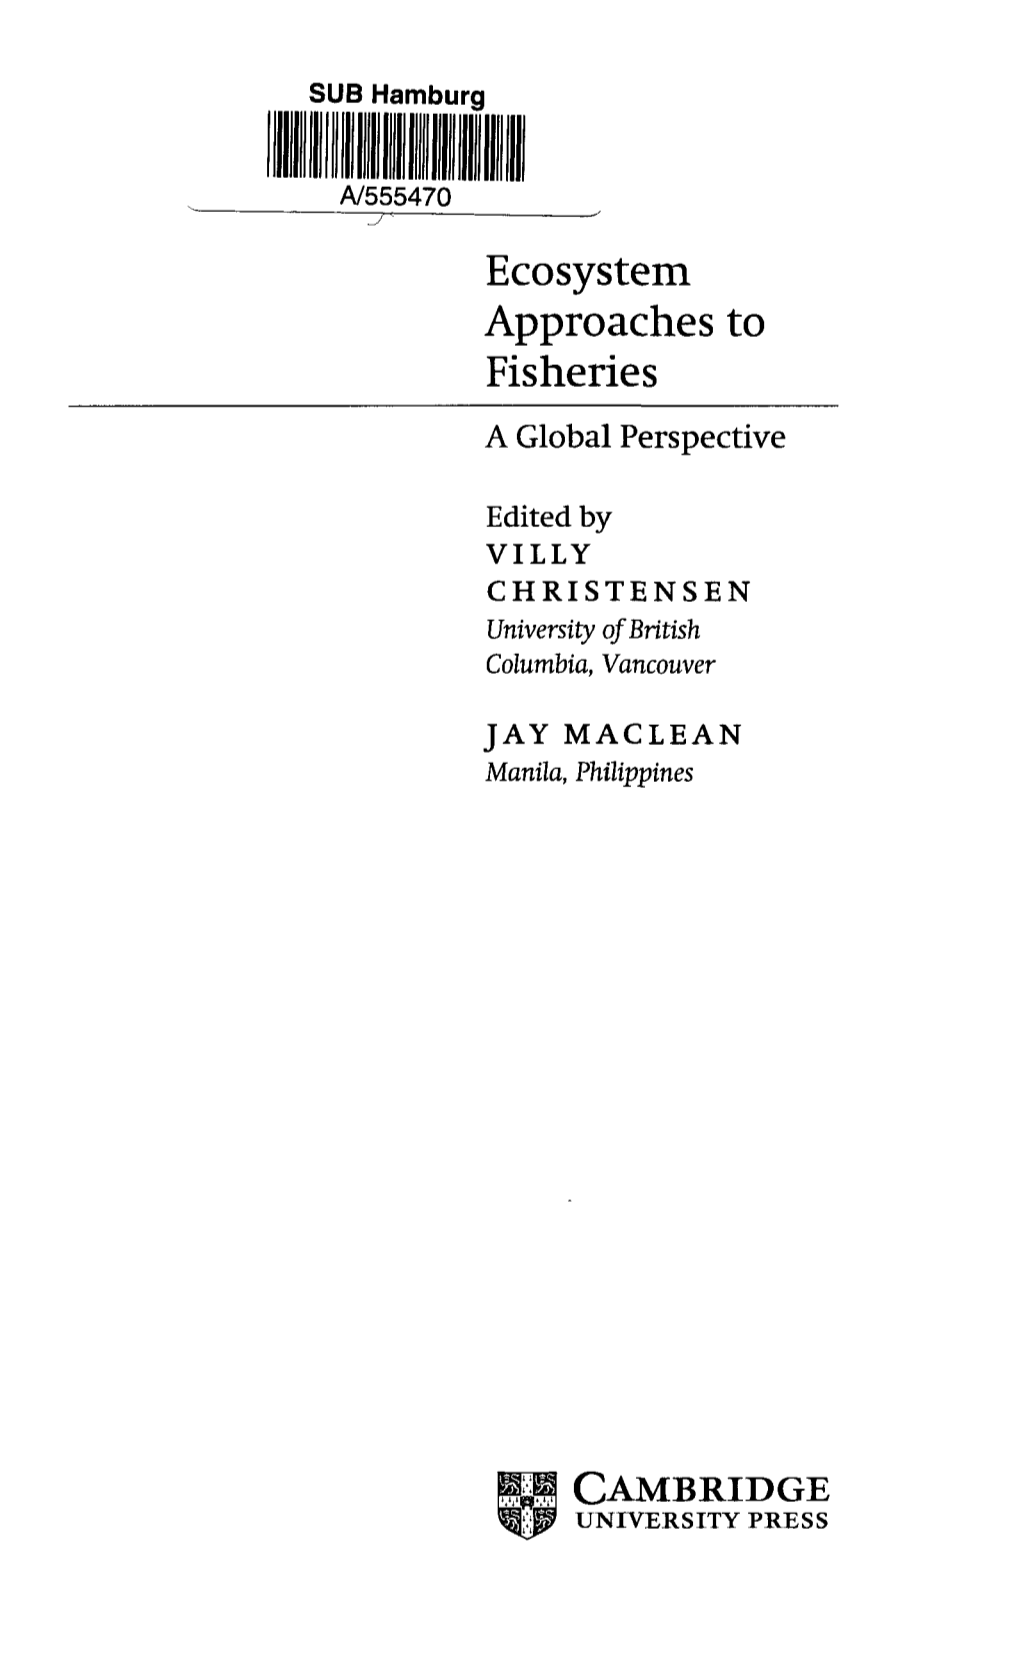 Ecosystem Approaches to Fisheries a Global Perspective